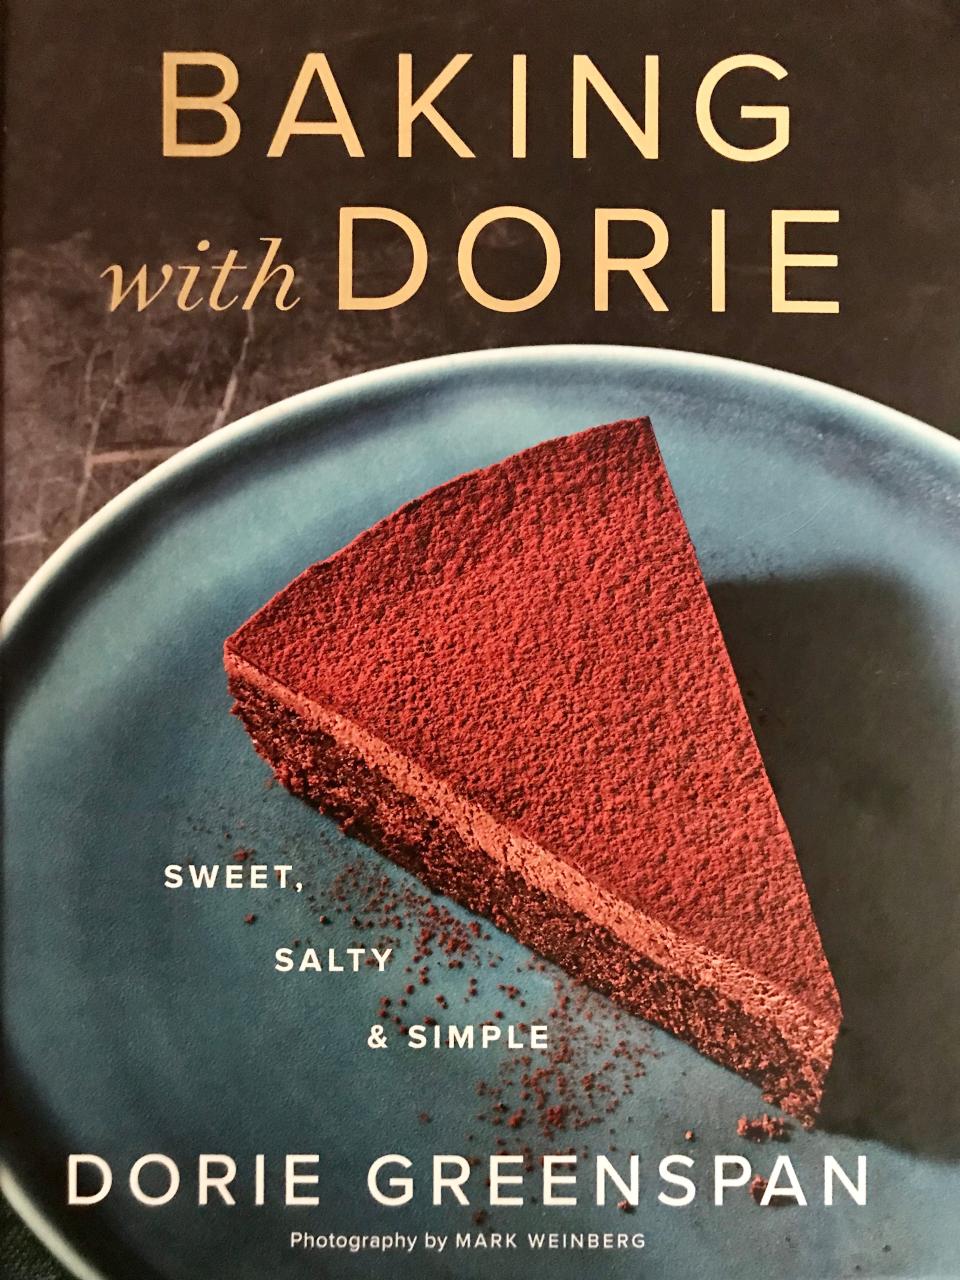 "Baking With Dorie: Sweet, Salty and Simple," by Dorie Greenspan, is the author's 14th book on baking.